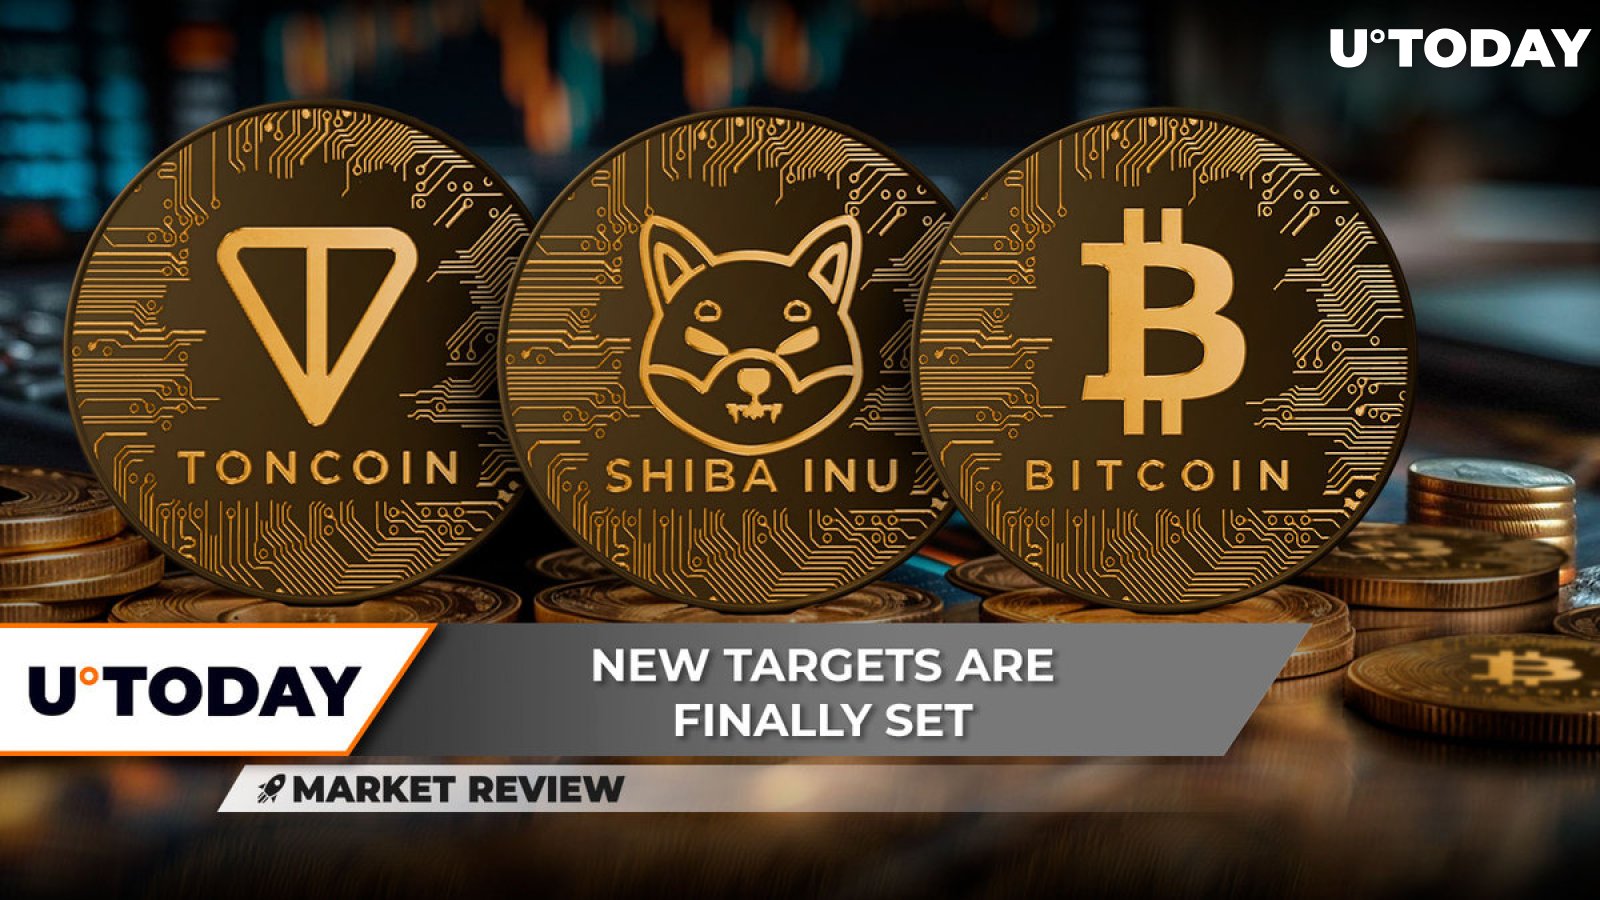 Toncoin (TON) to Hit $8 If This Happens, Shiba Inu (SHIB) Is Anemic: Is It Good or Bad Thing? Bitcoin (BTC) at Pivotal Moment Reaching $63,000